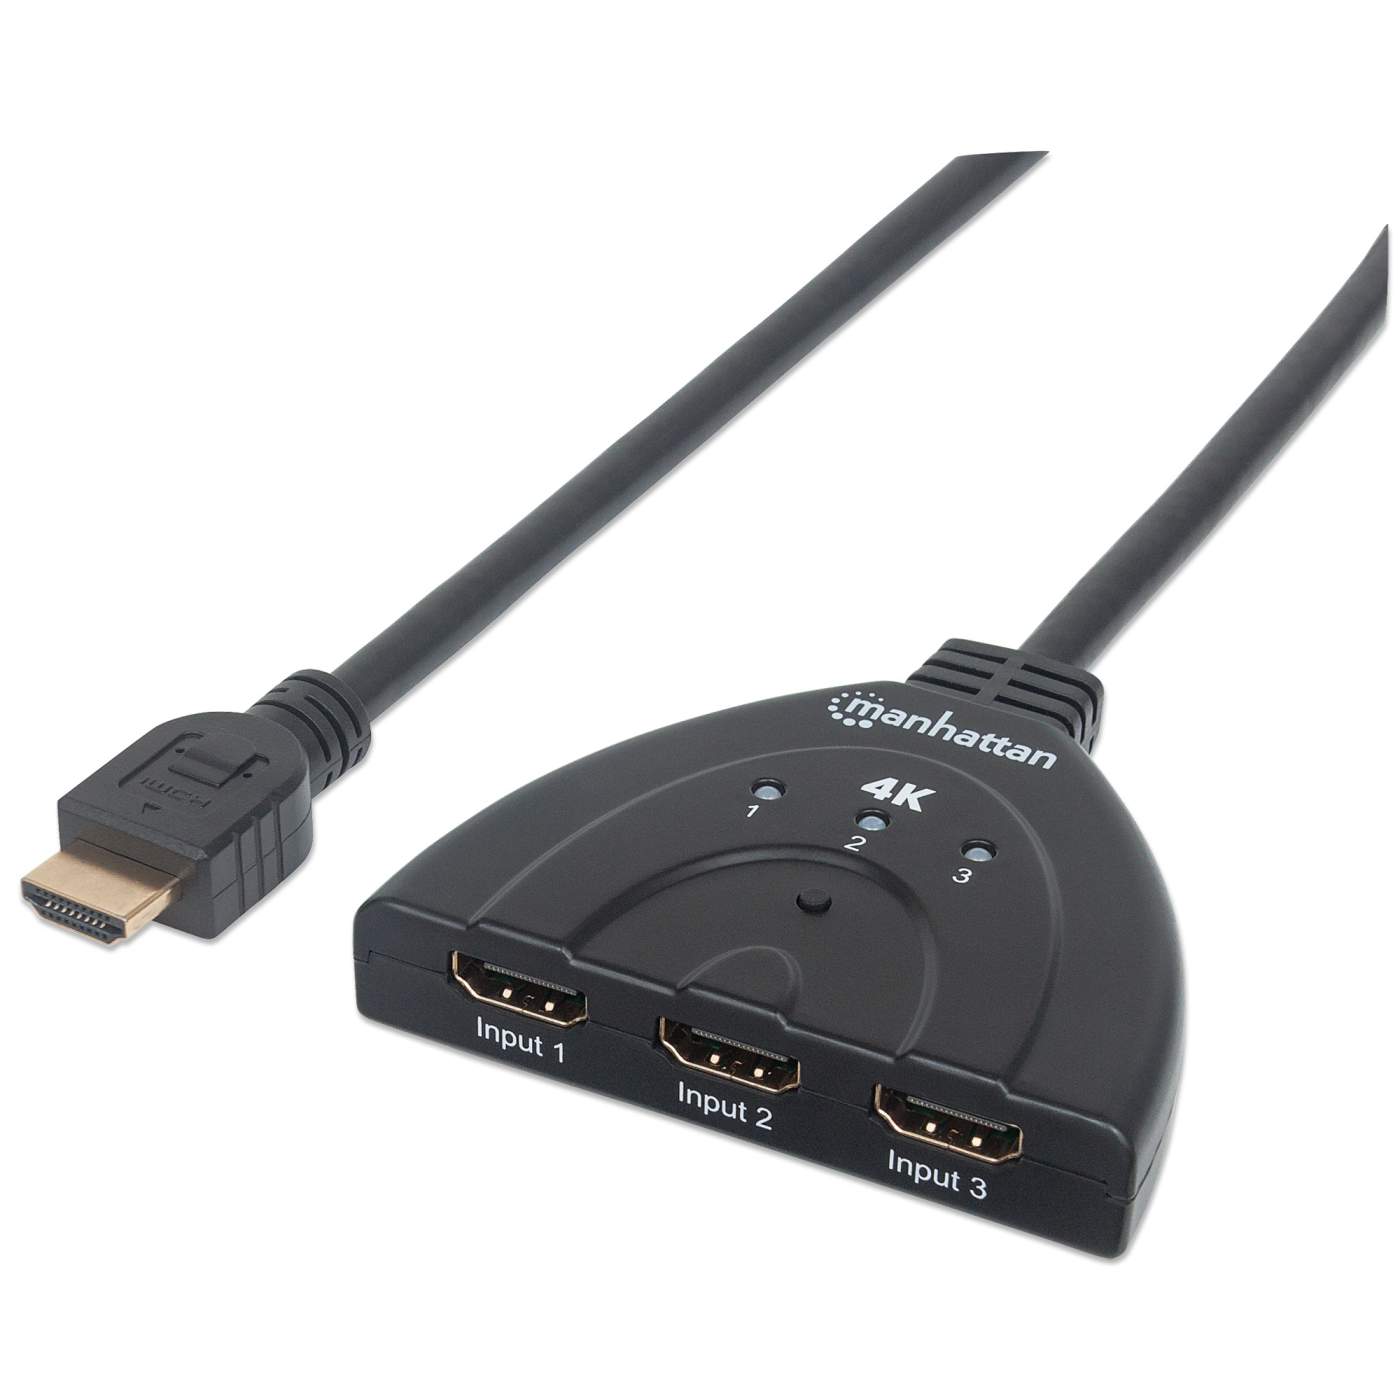 Hdmi 3 Switch (neuf) GANA deluxe computer cable